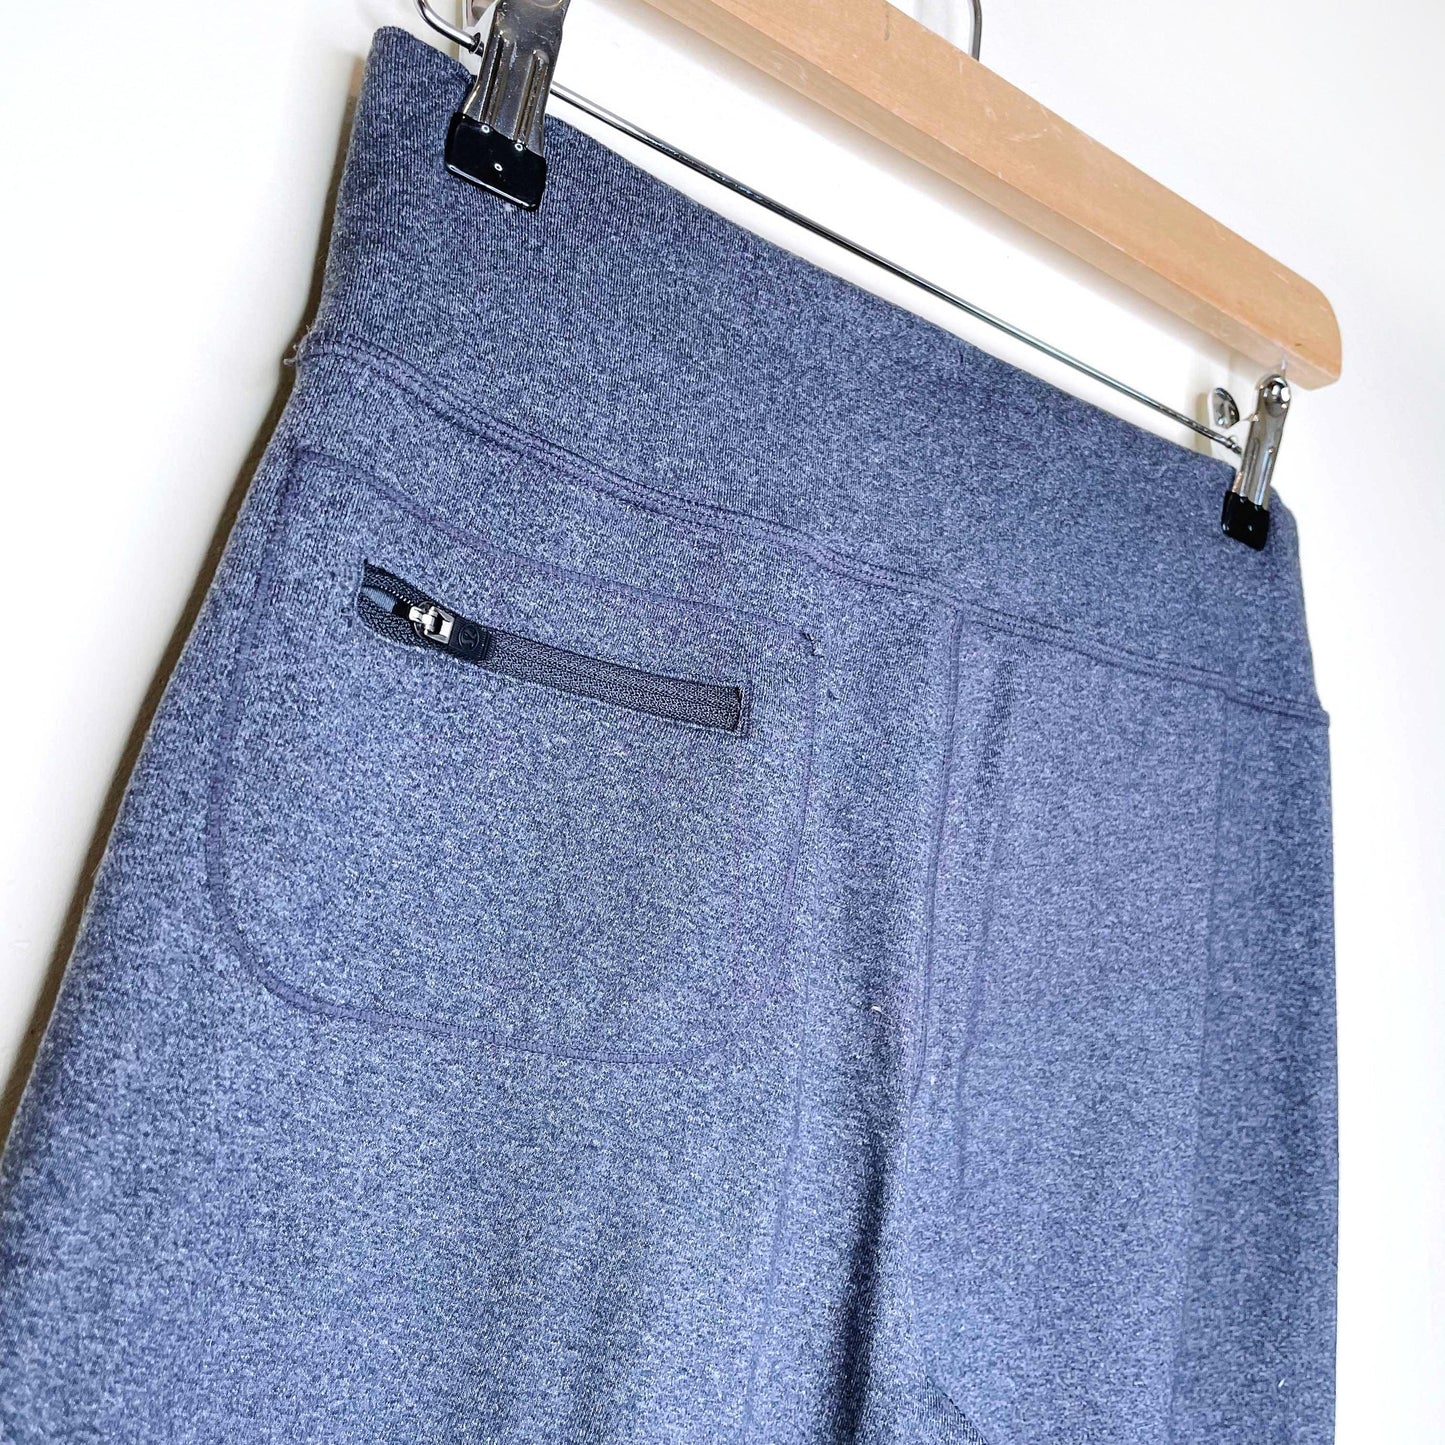 lululemon relaxed fit drawstring pants in deep heathered coal - size 4